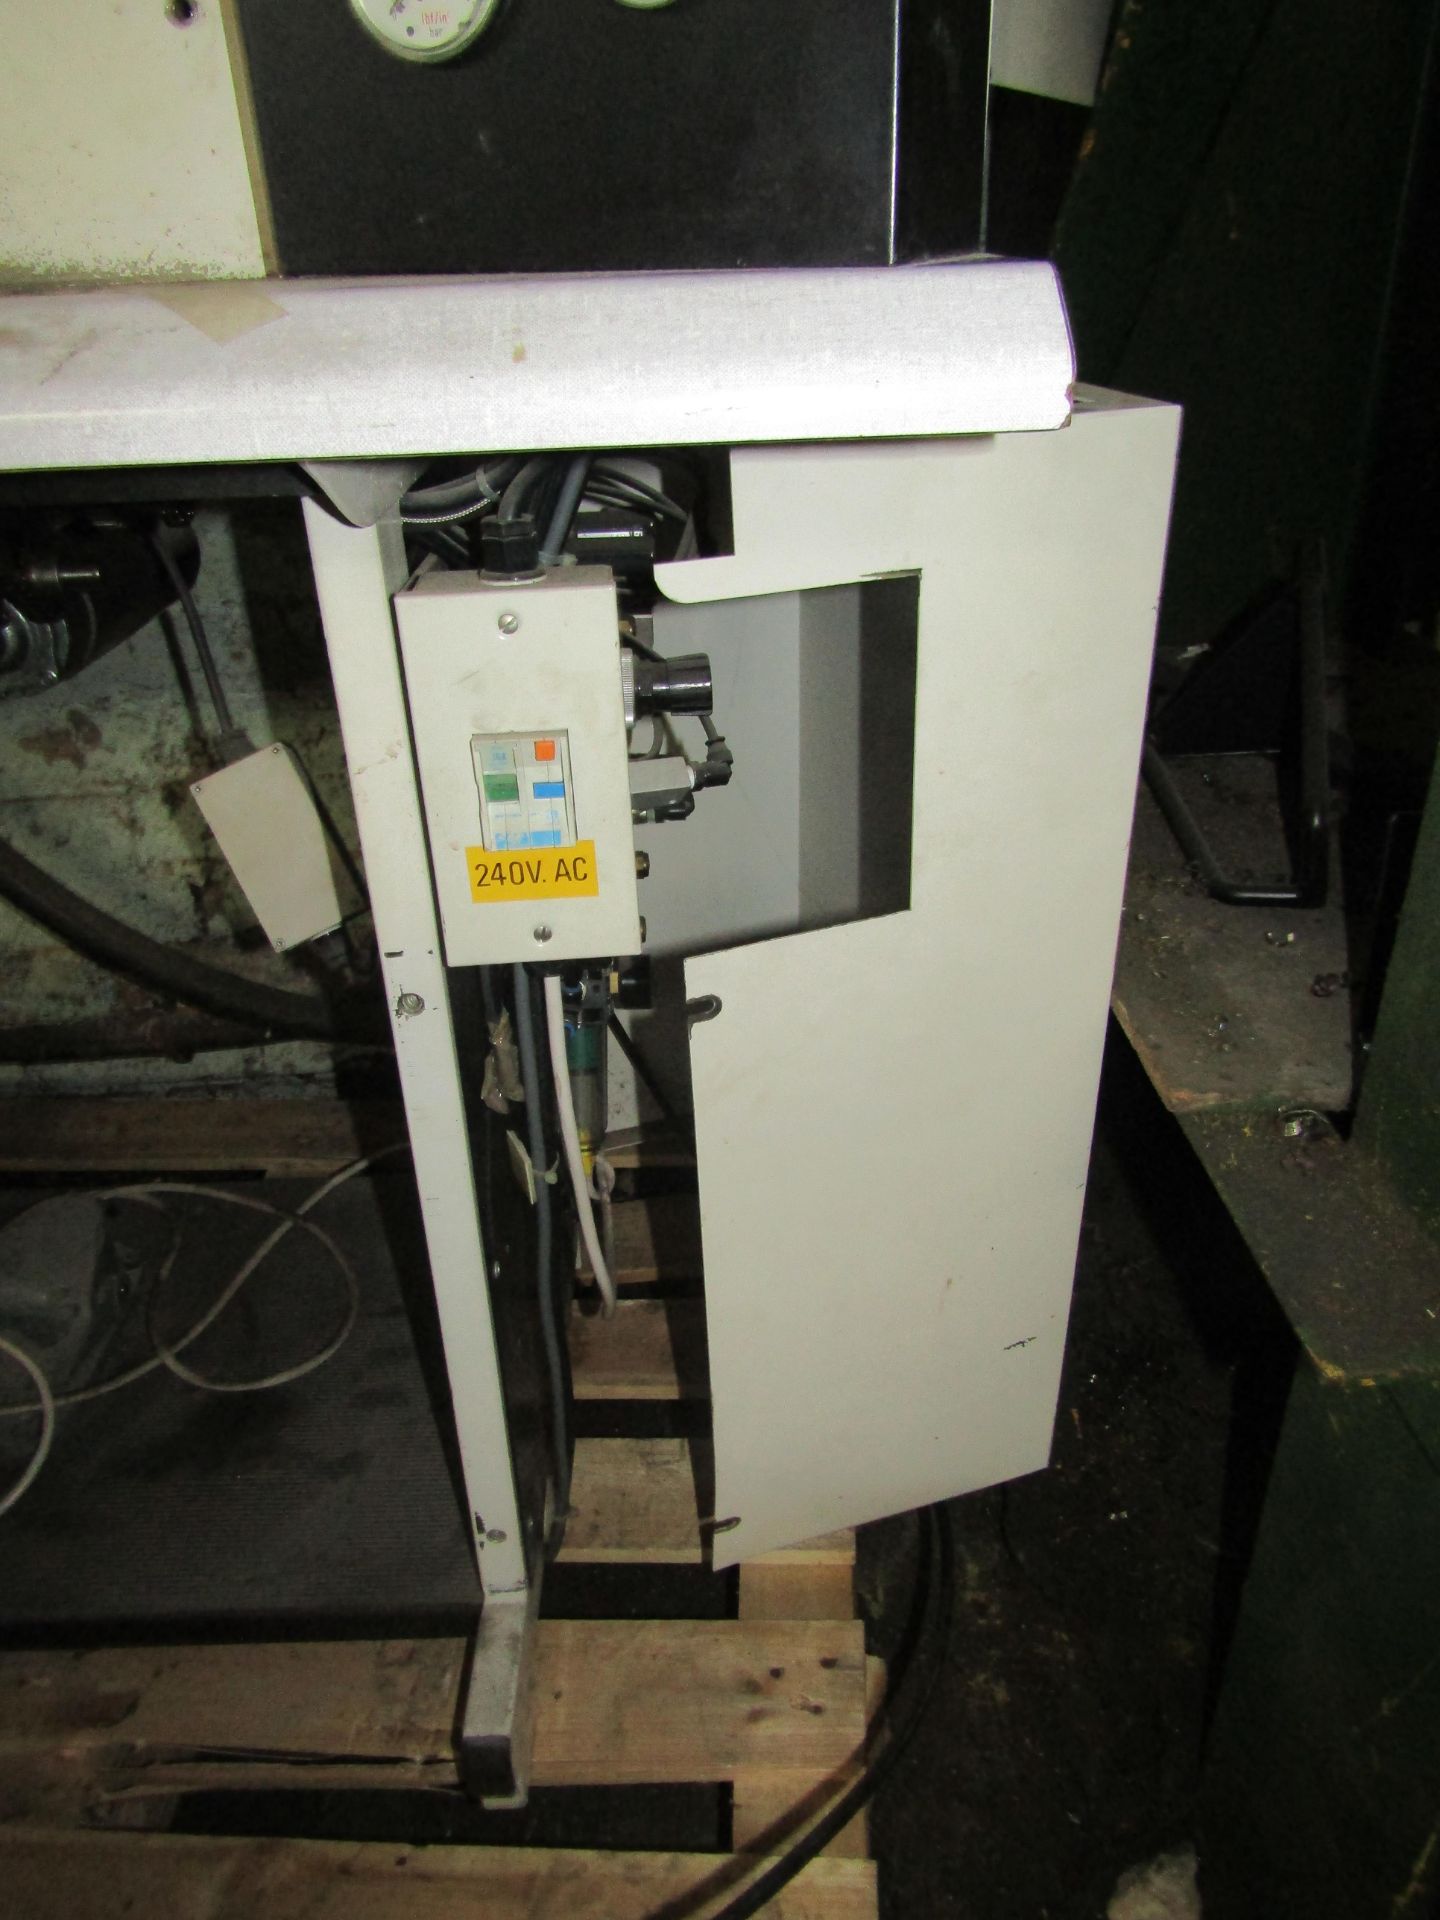 Ardmel tape seam sealer machine with Hydrovane 501 compressor. the business it was removed from says - Image 4 of 6